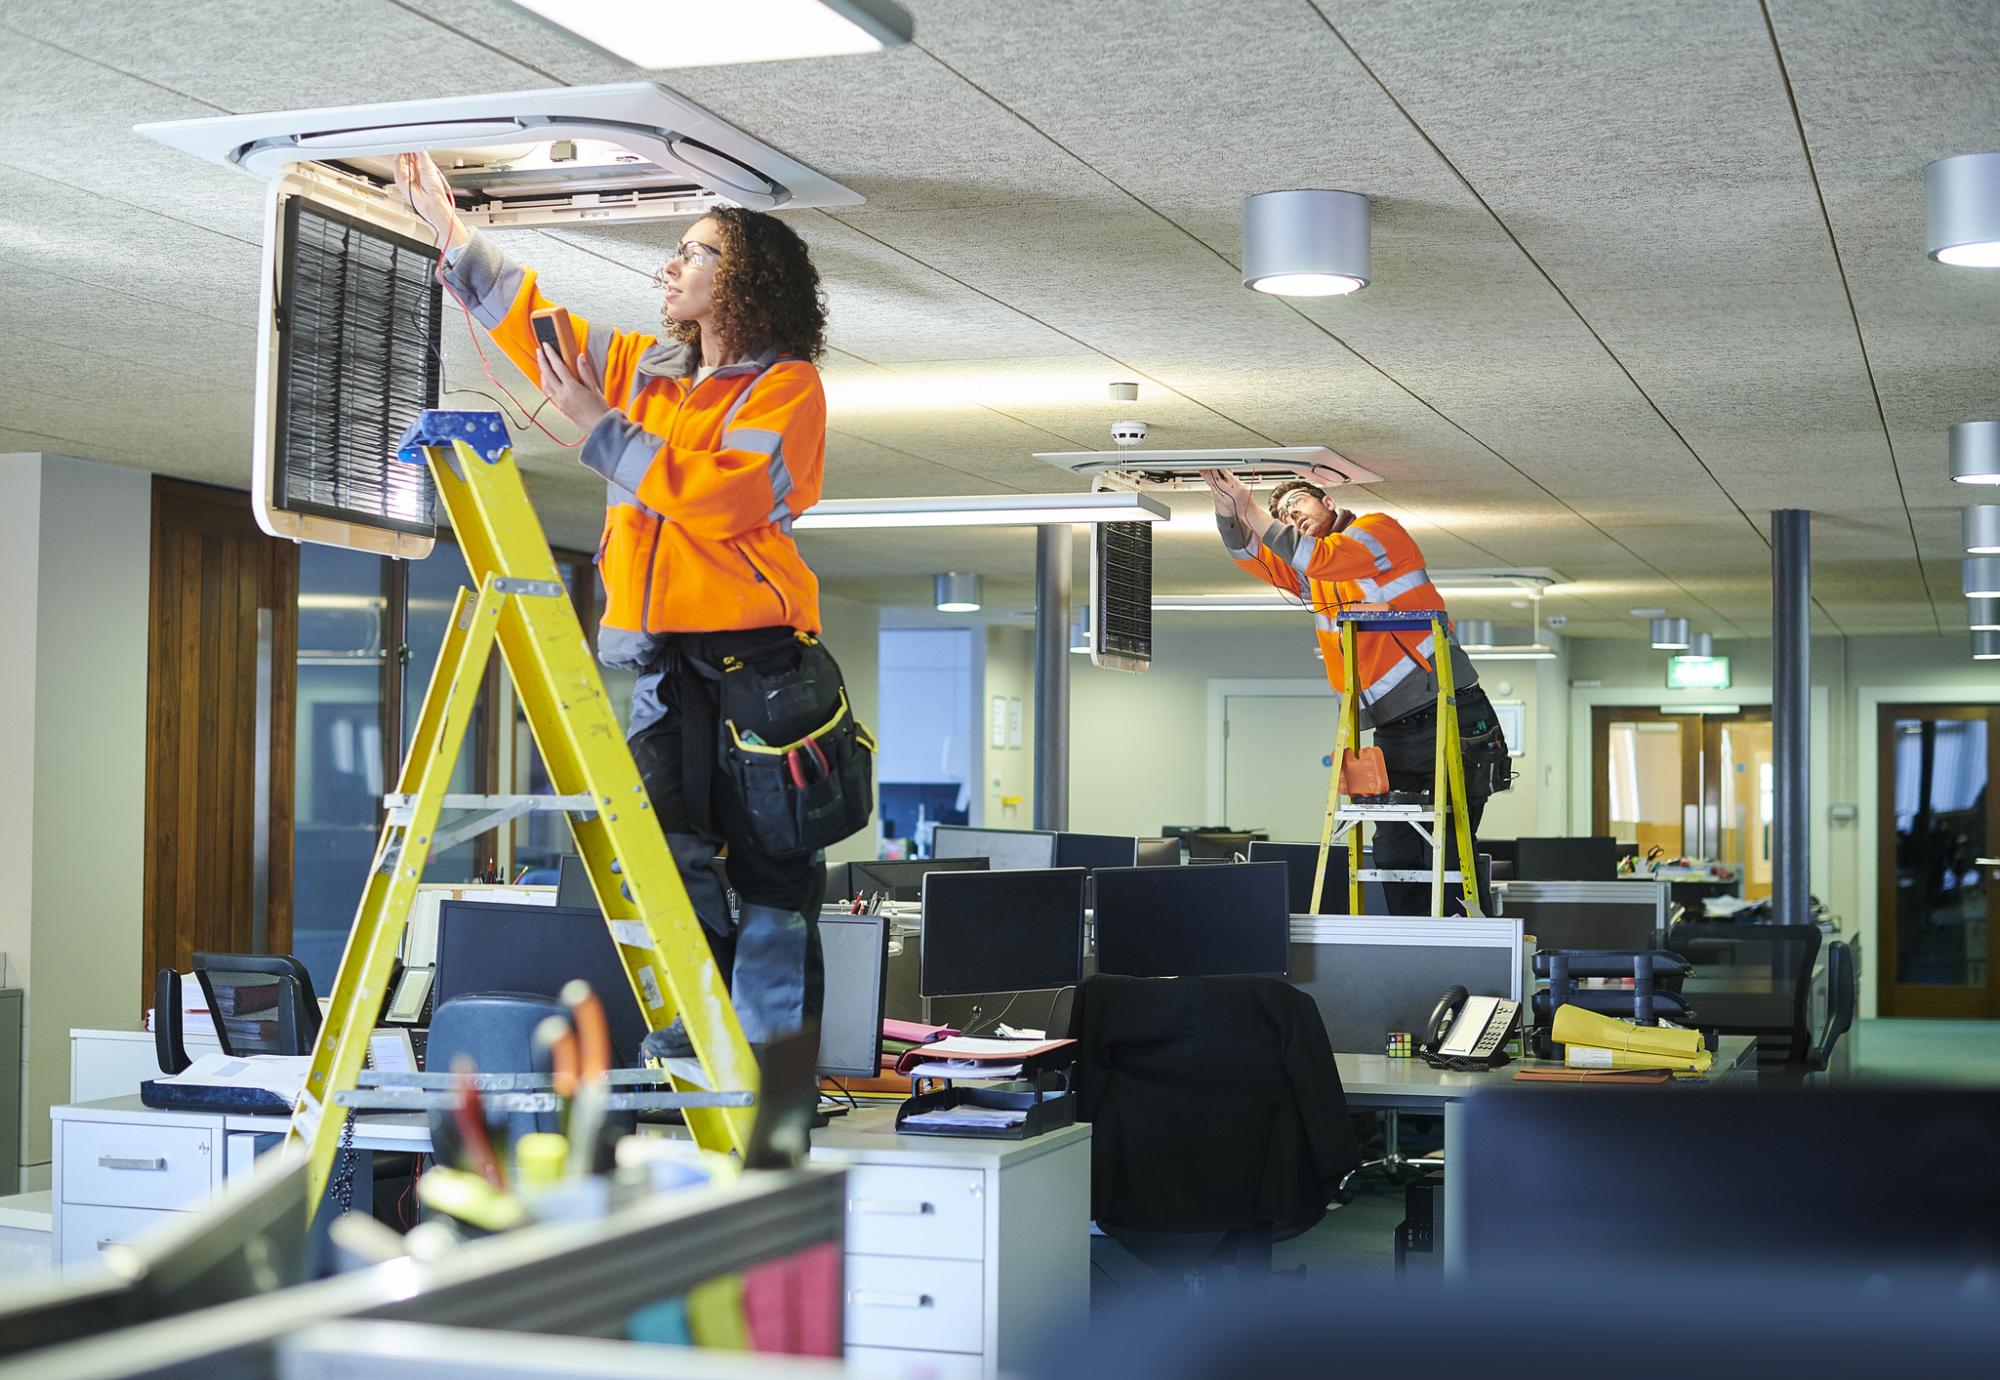 Technicians changing lights in an office building